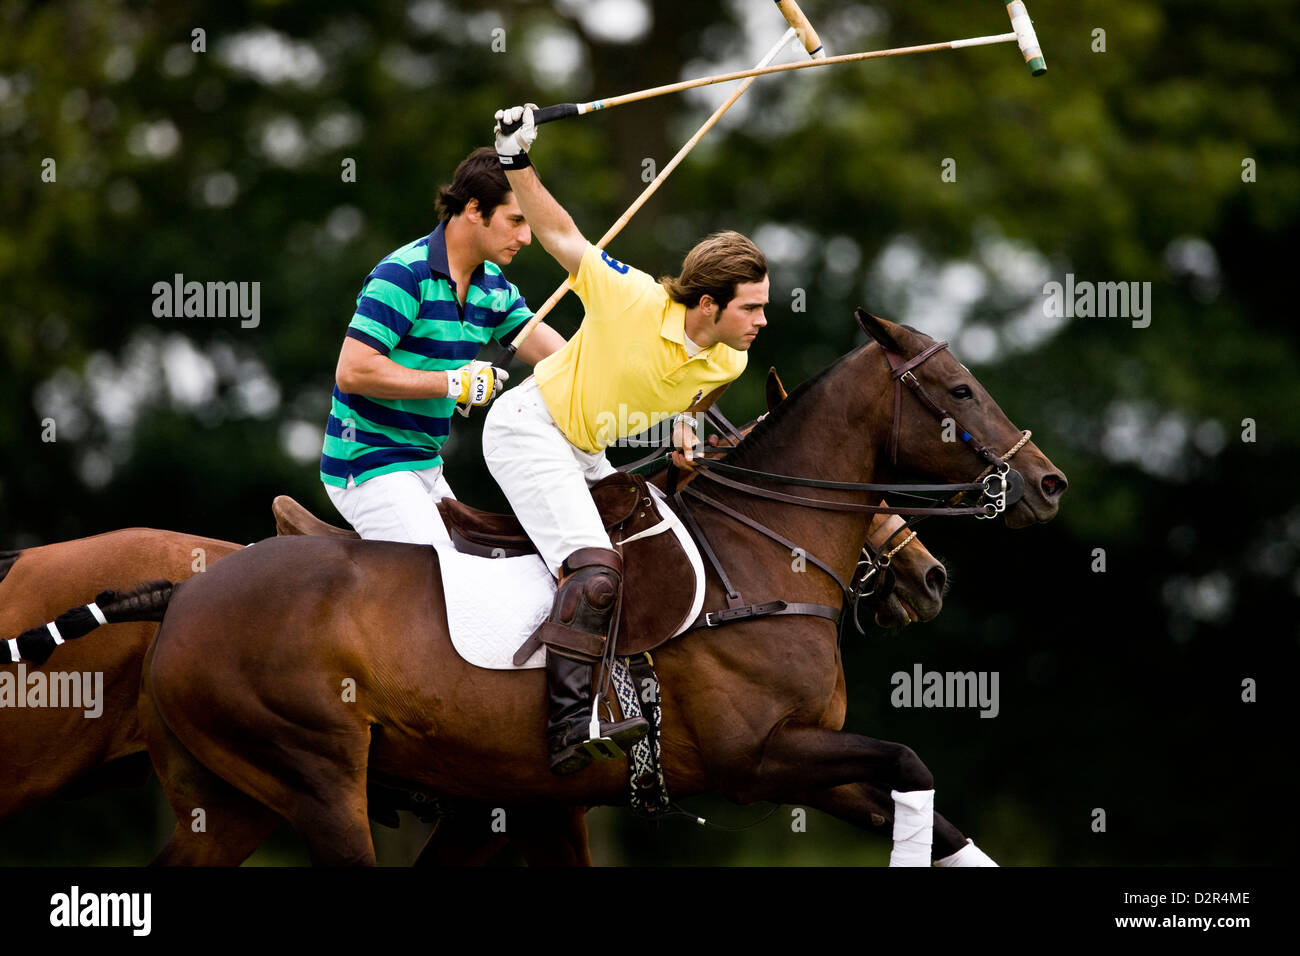 Polo player holding reins and hitting the ball on horseback Stock Photo